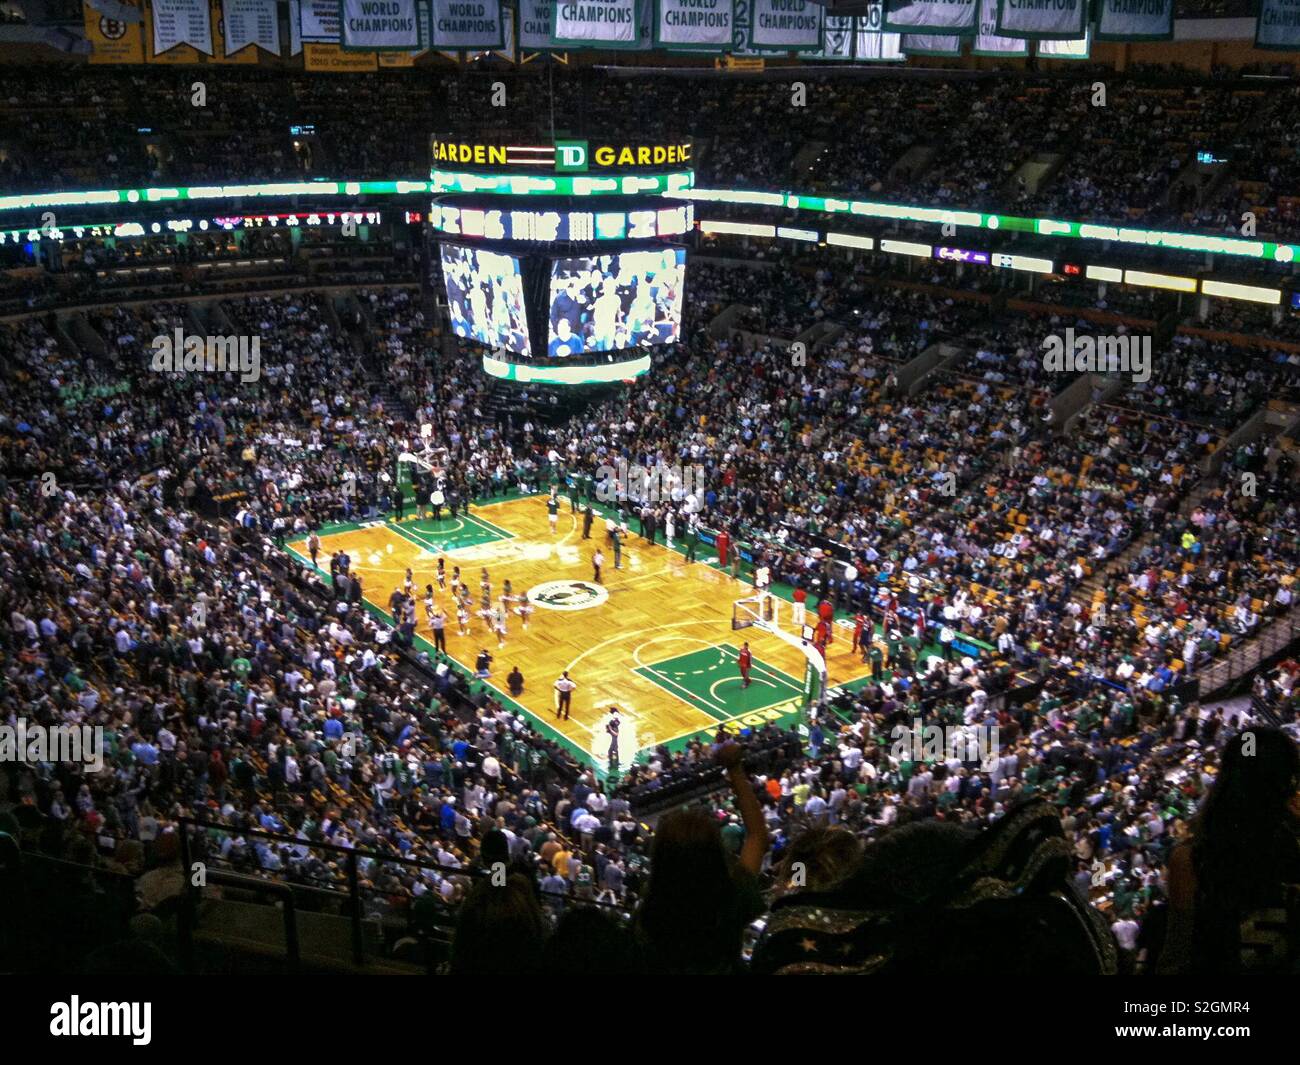 Where to Eat in and Around Boston's TD Garden